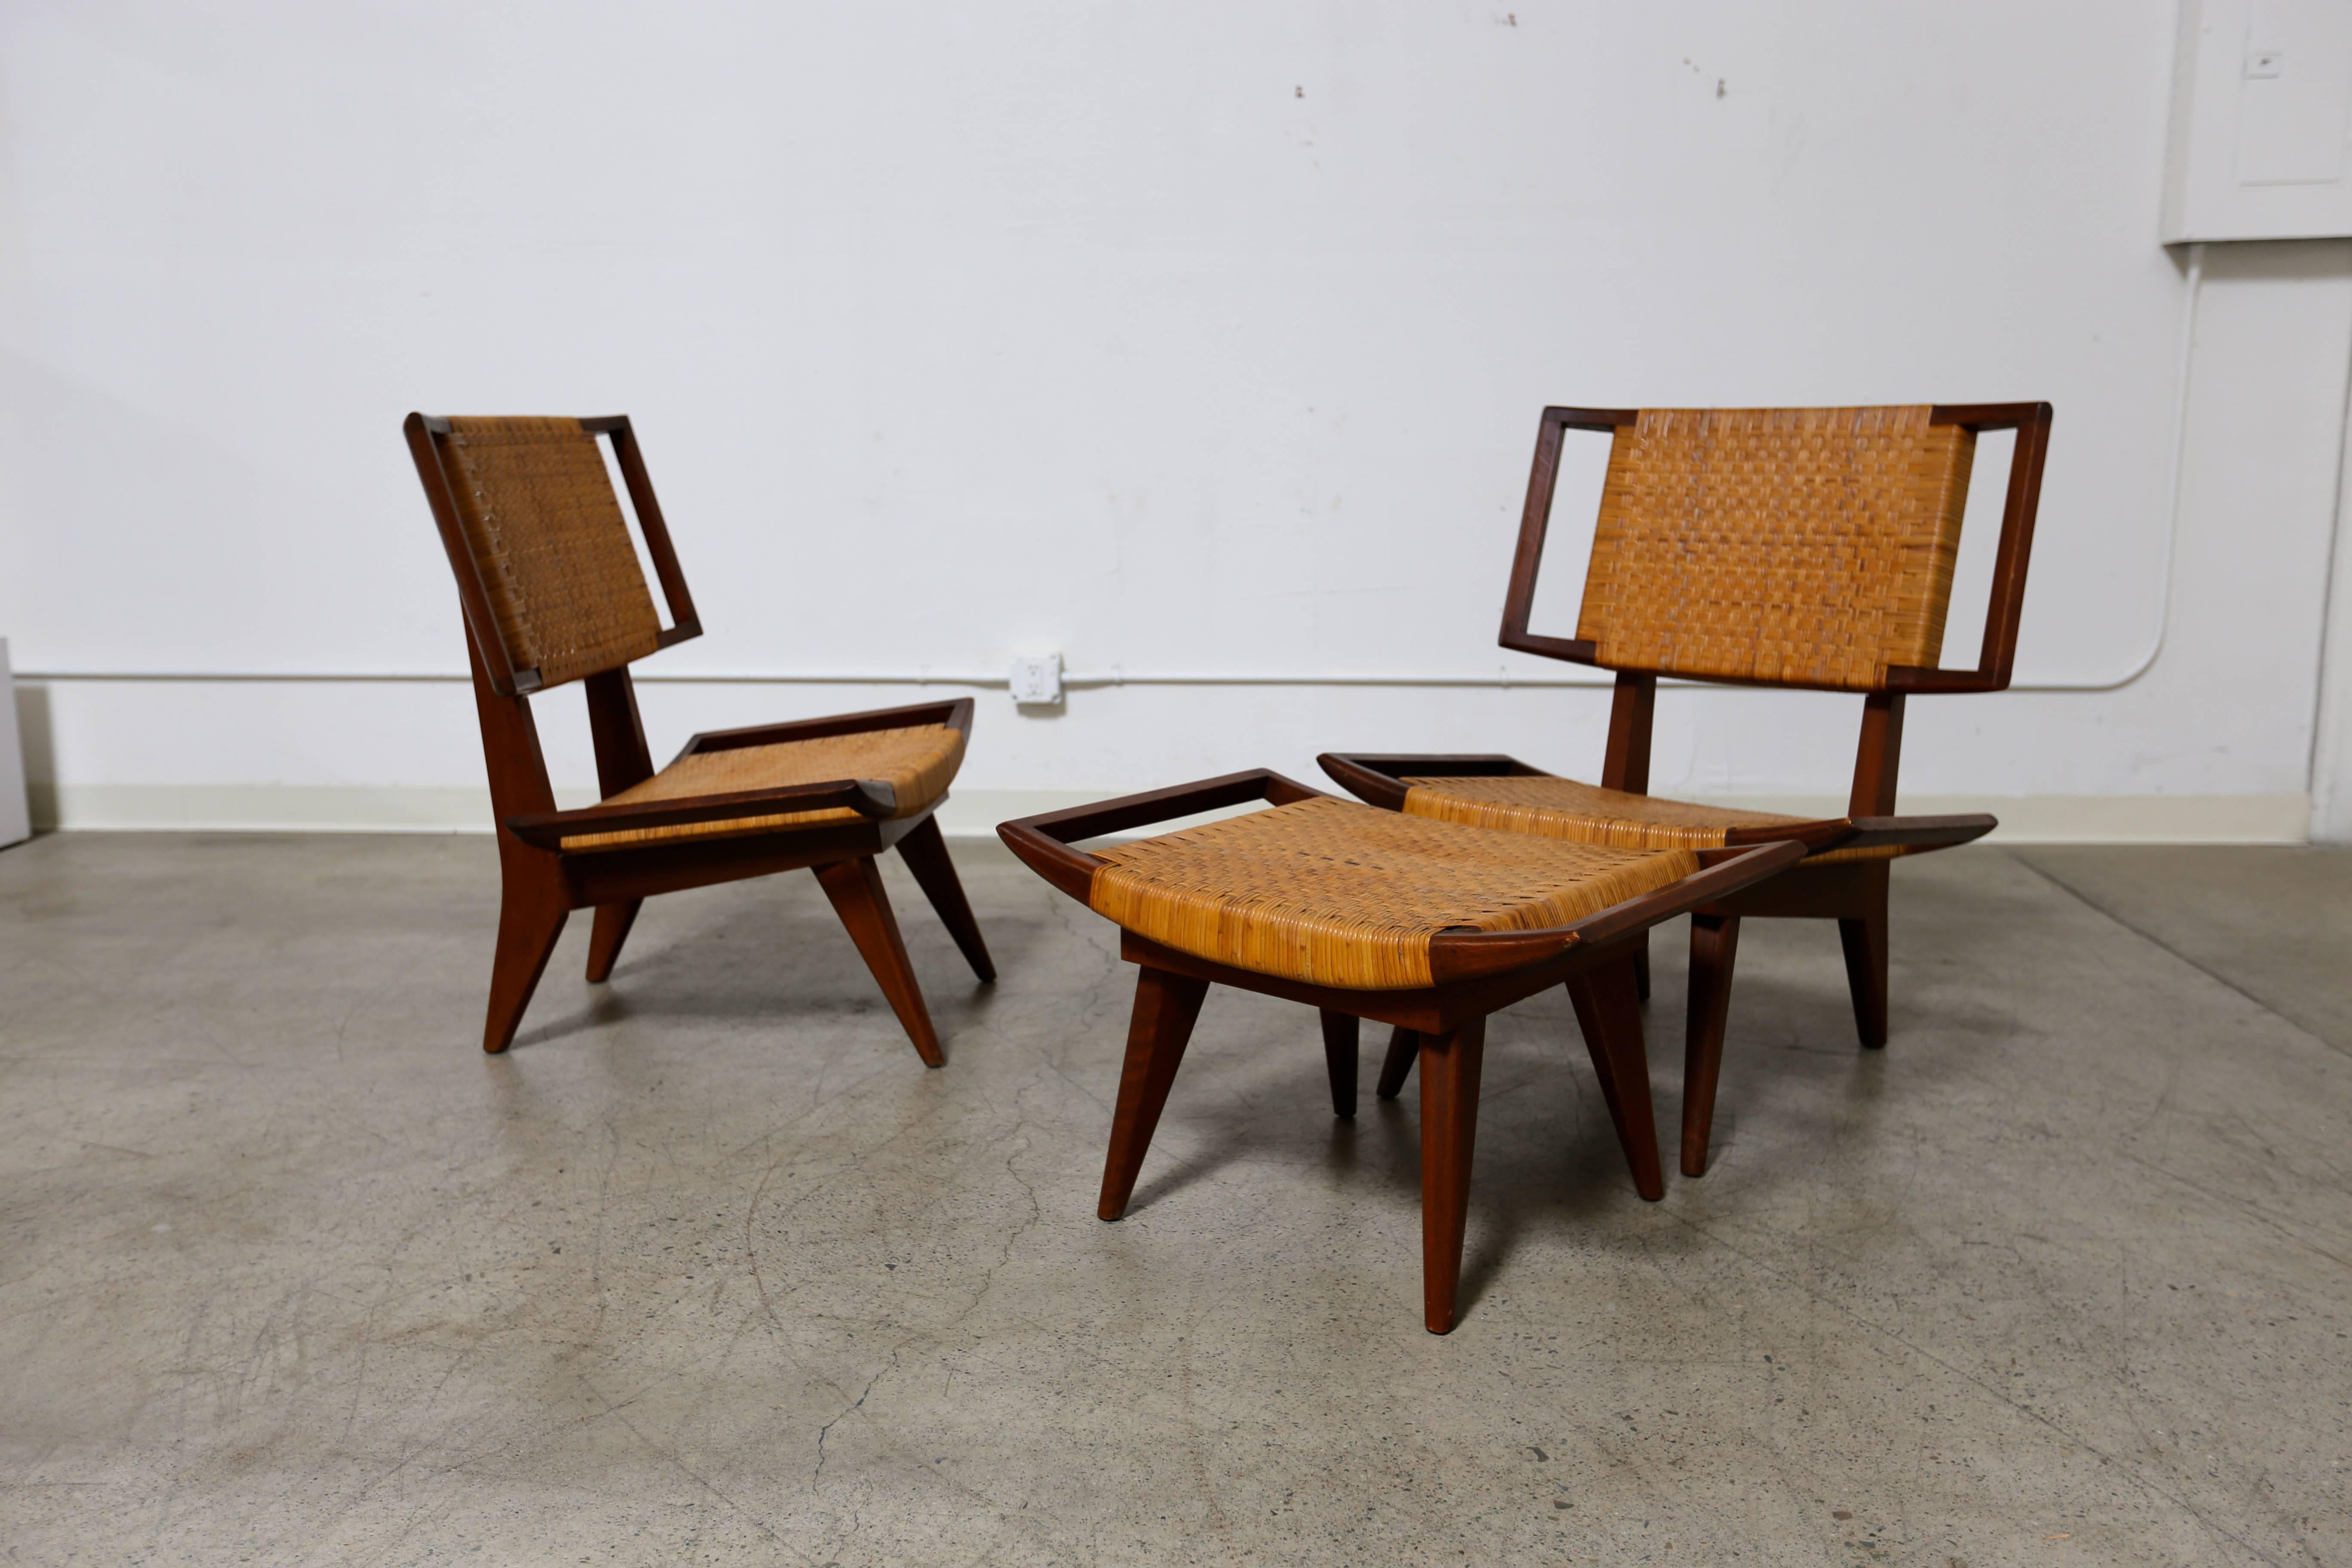 20th Century Rare Pair of Lounge Chairs by Paul Laszlo